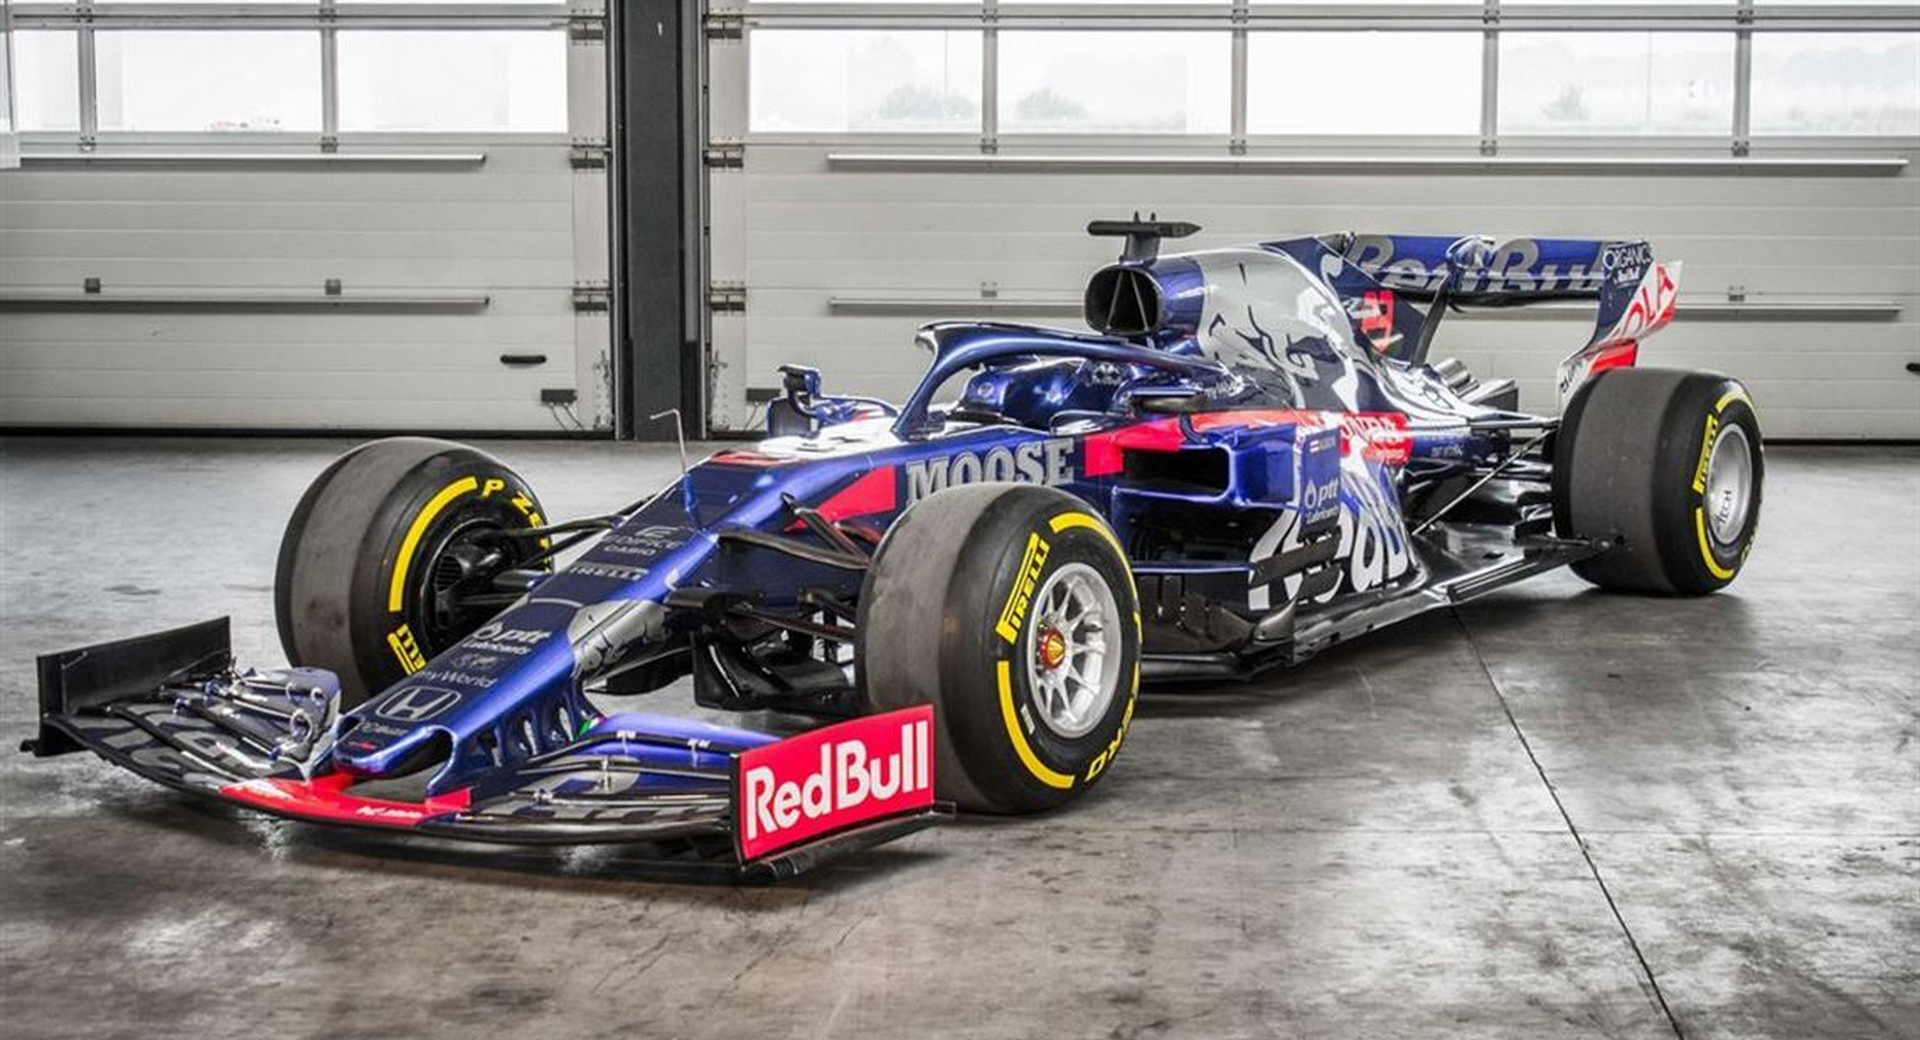 Garderobe Verknald Verlichten Ever Wanted To Own An F1 Car? Now's Your Chance With This 2019 Toro Rosso  STR14 | Carscoops